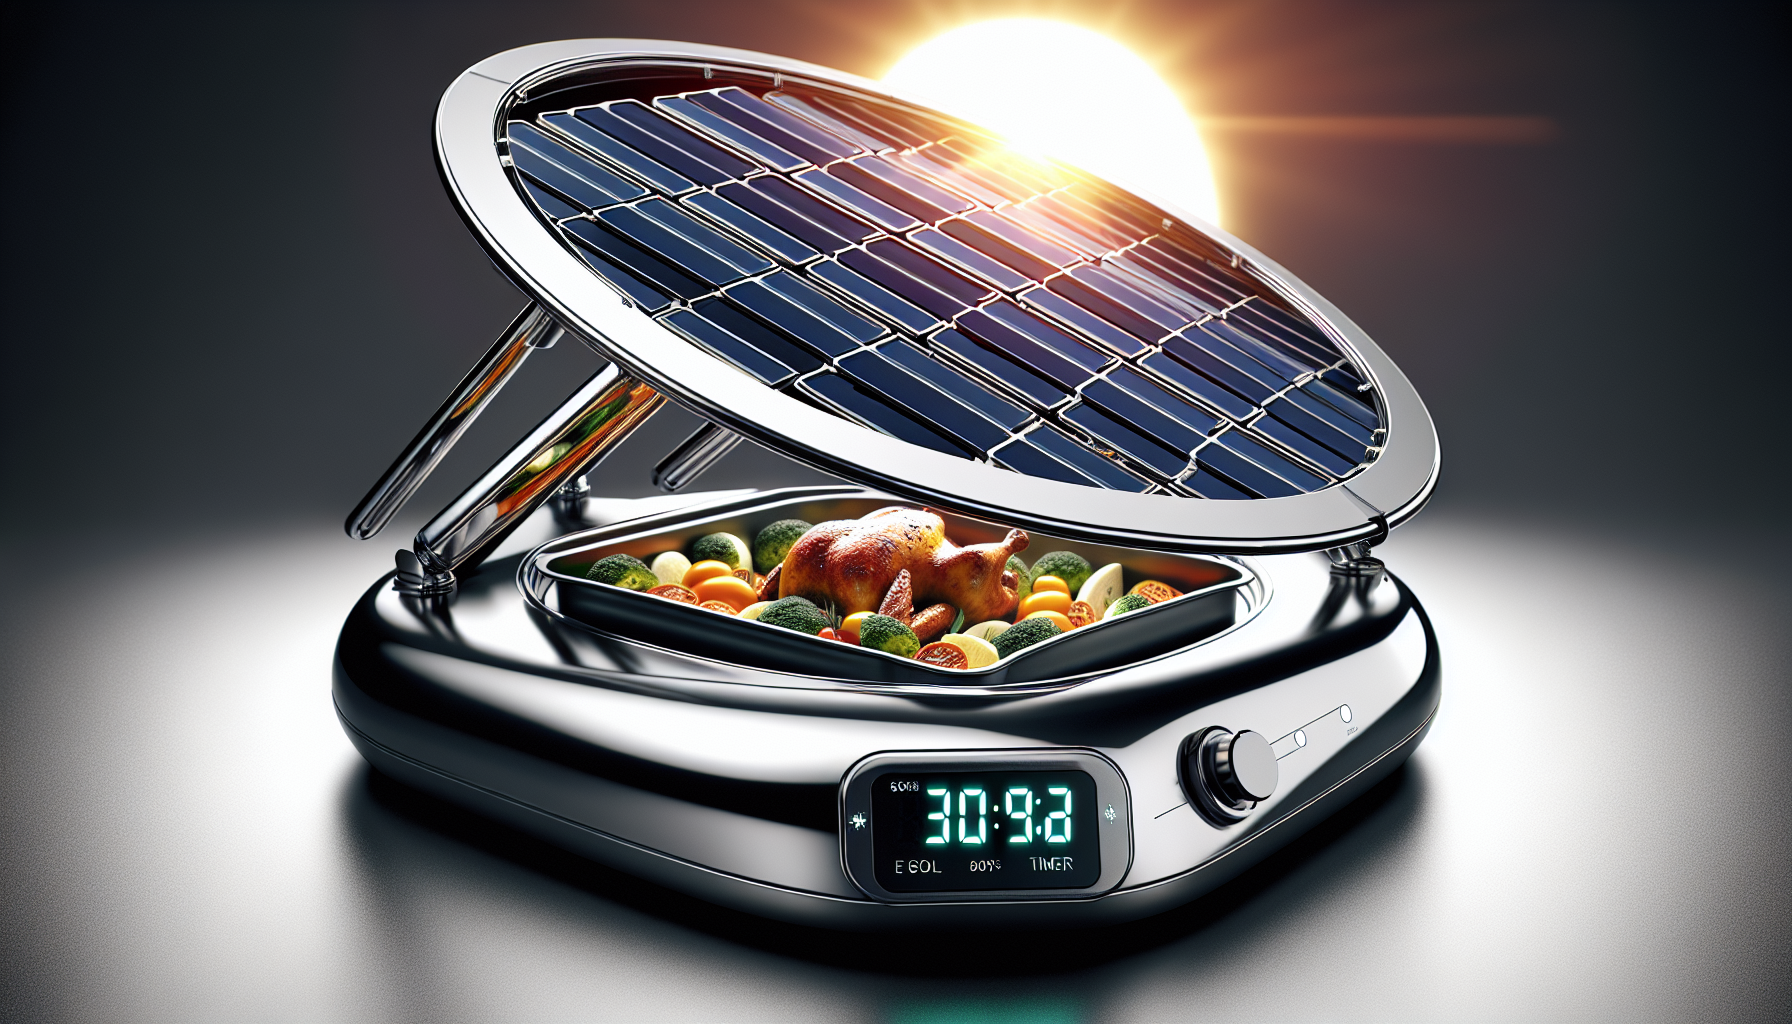 Solar-powered cooking appliances